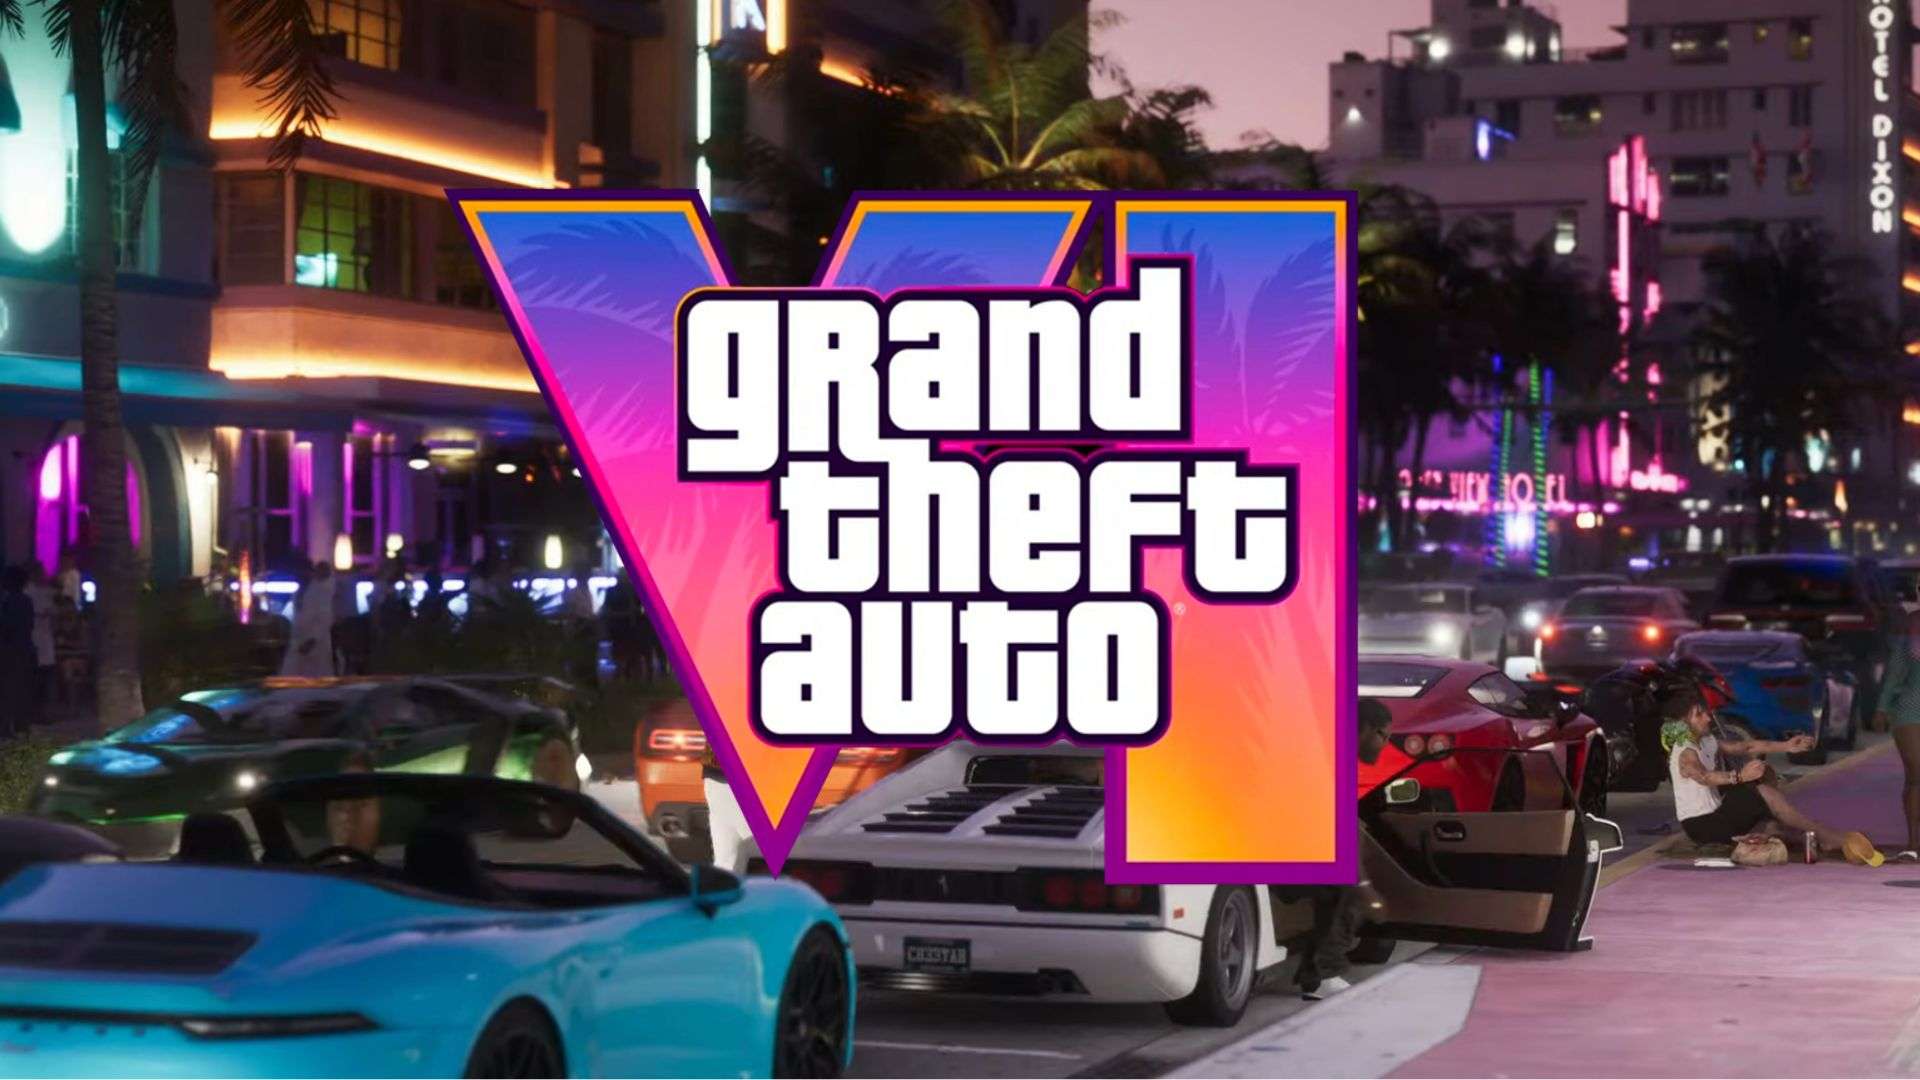 Nightlife in GTA 6 with cars parked on street and people walking around